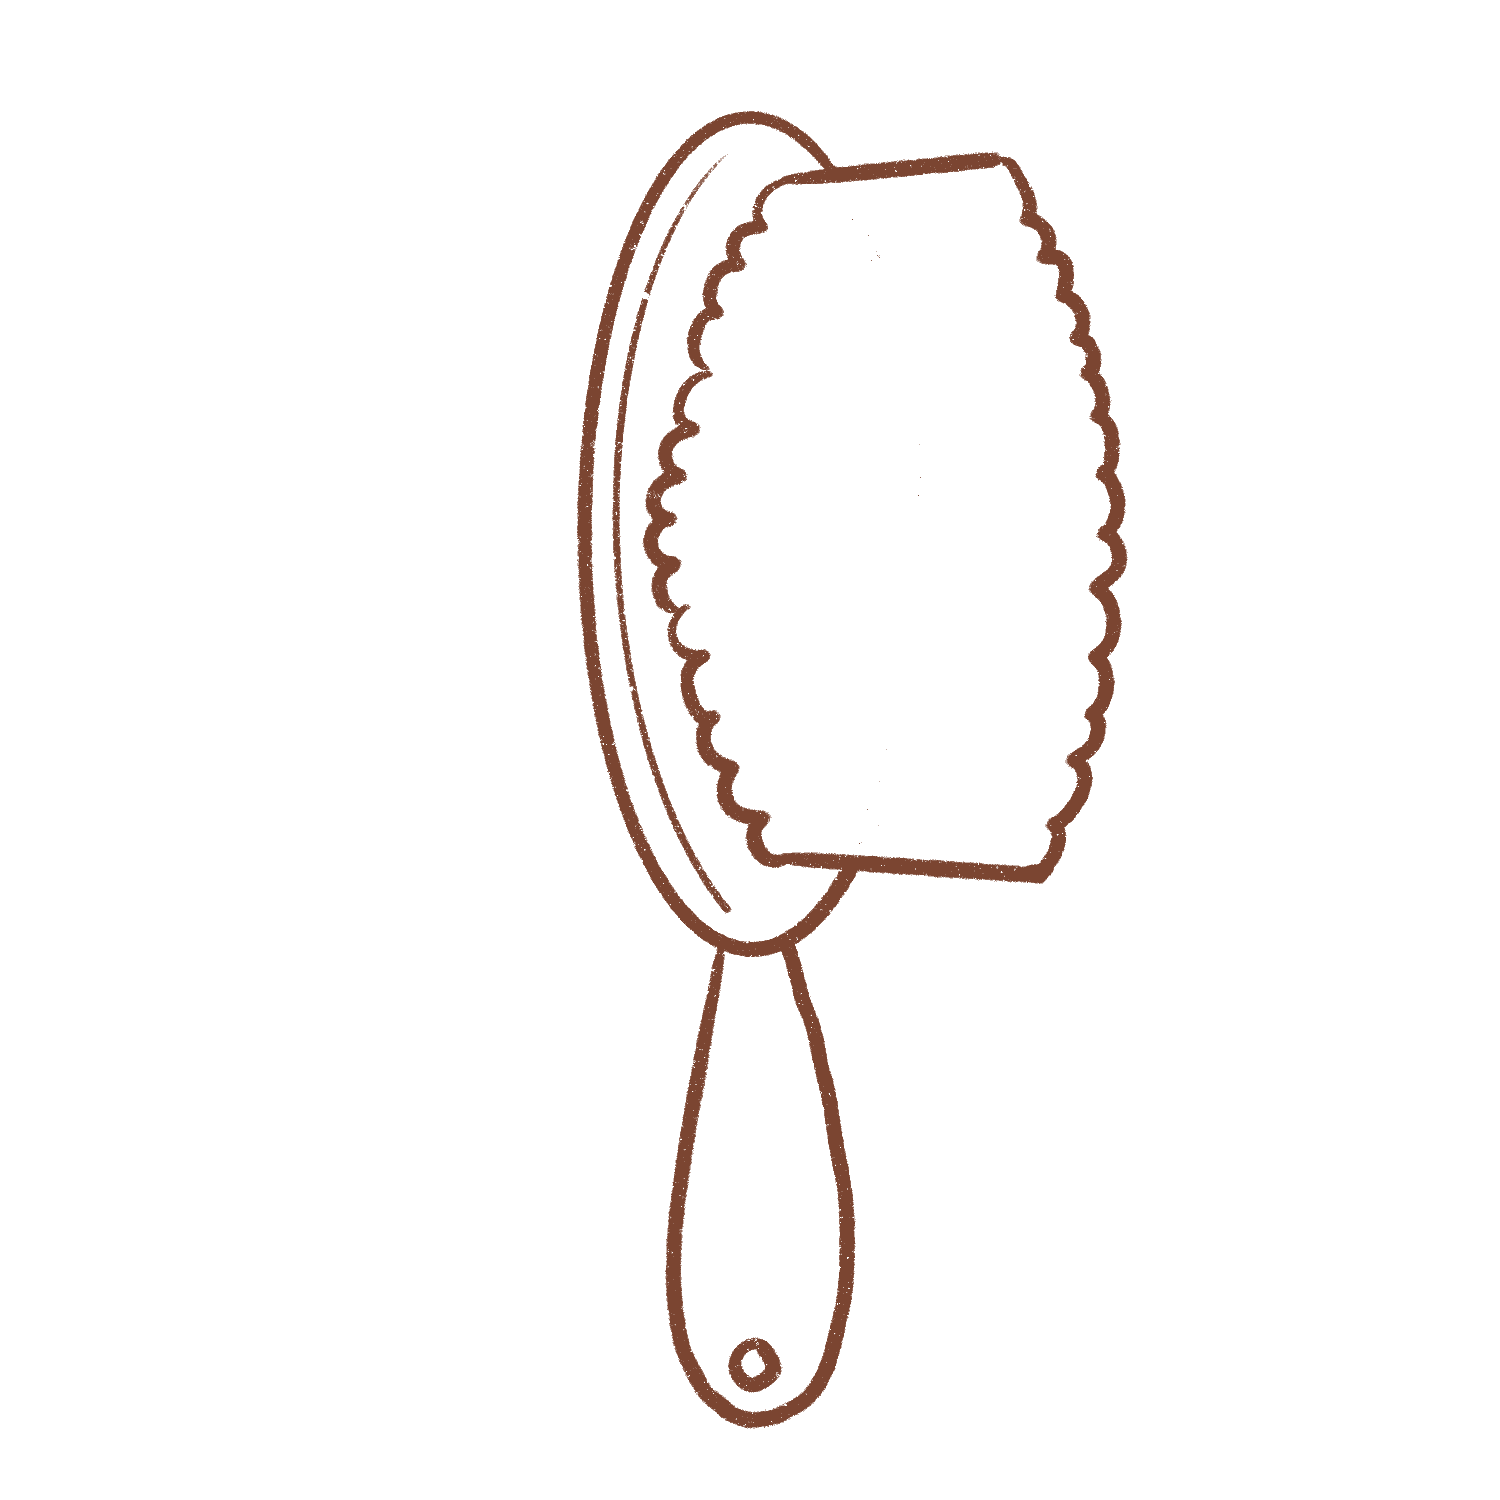 How to Draw a Simple Hairbrush Easy Step by Step Tutorial